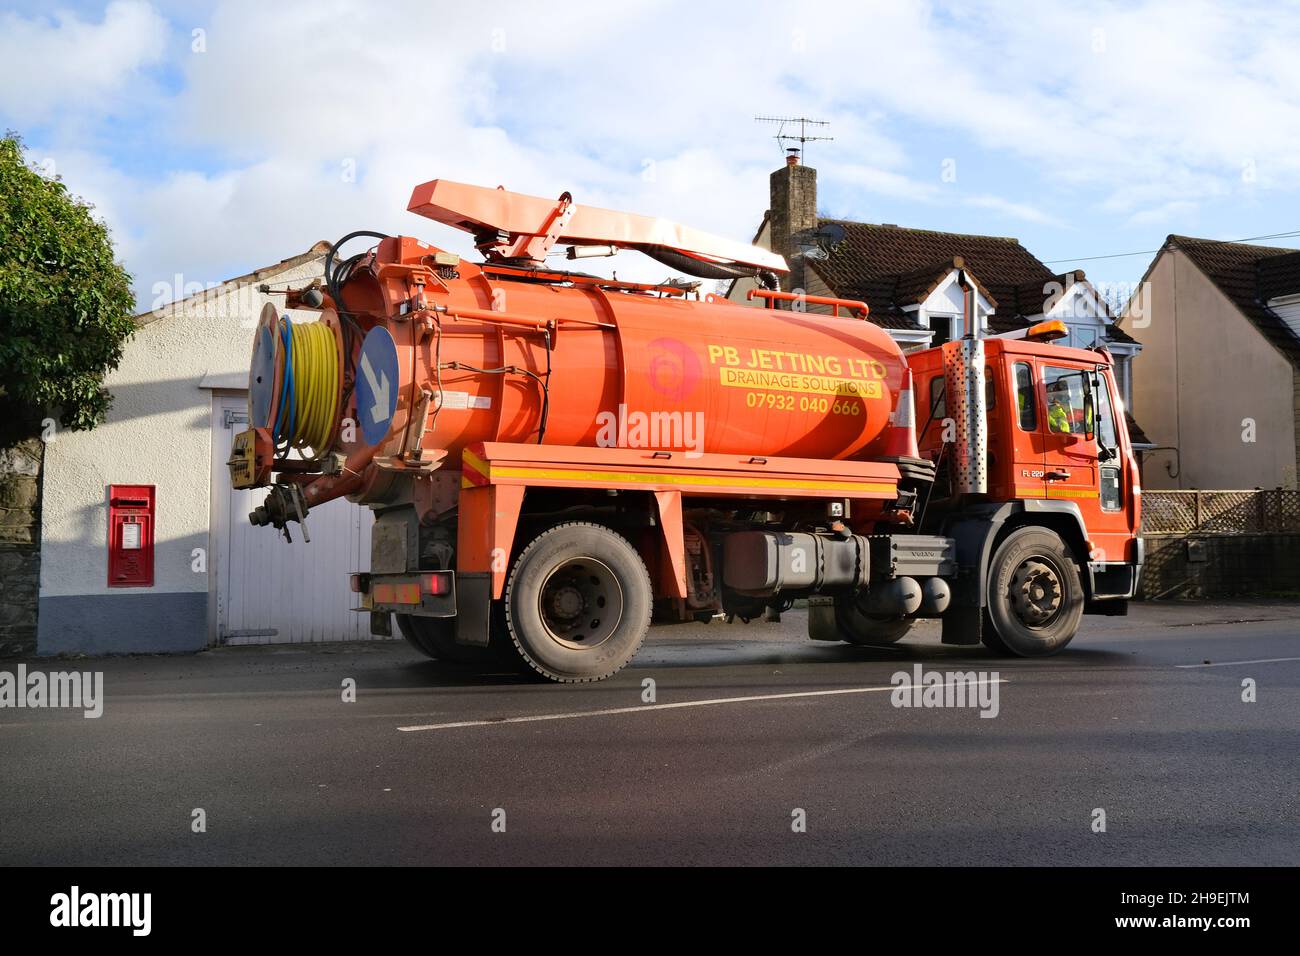 November 2021 - Drain jetting truck on call in the village of Cheddar, Somerset, UK. Stock Photo